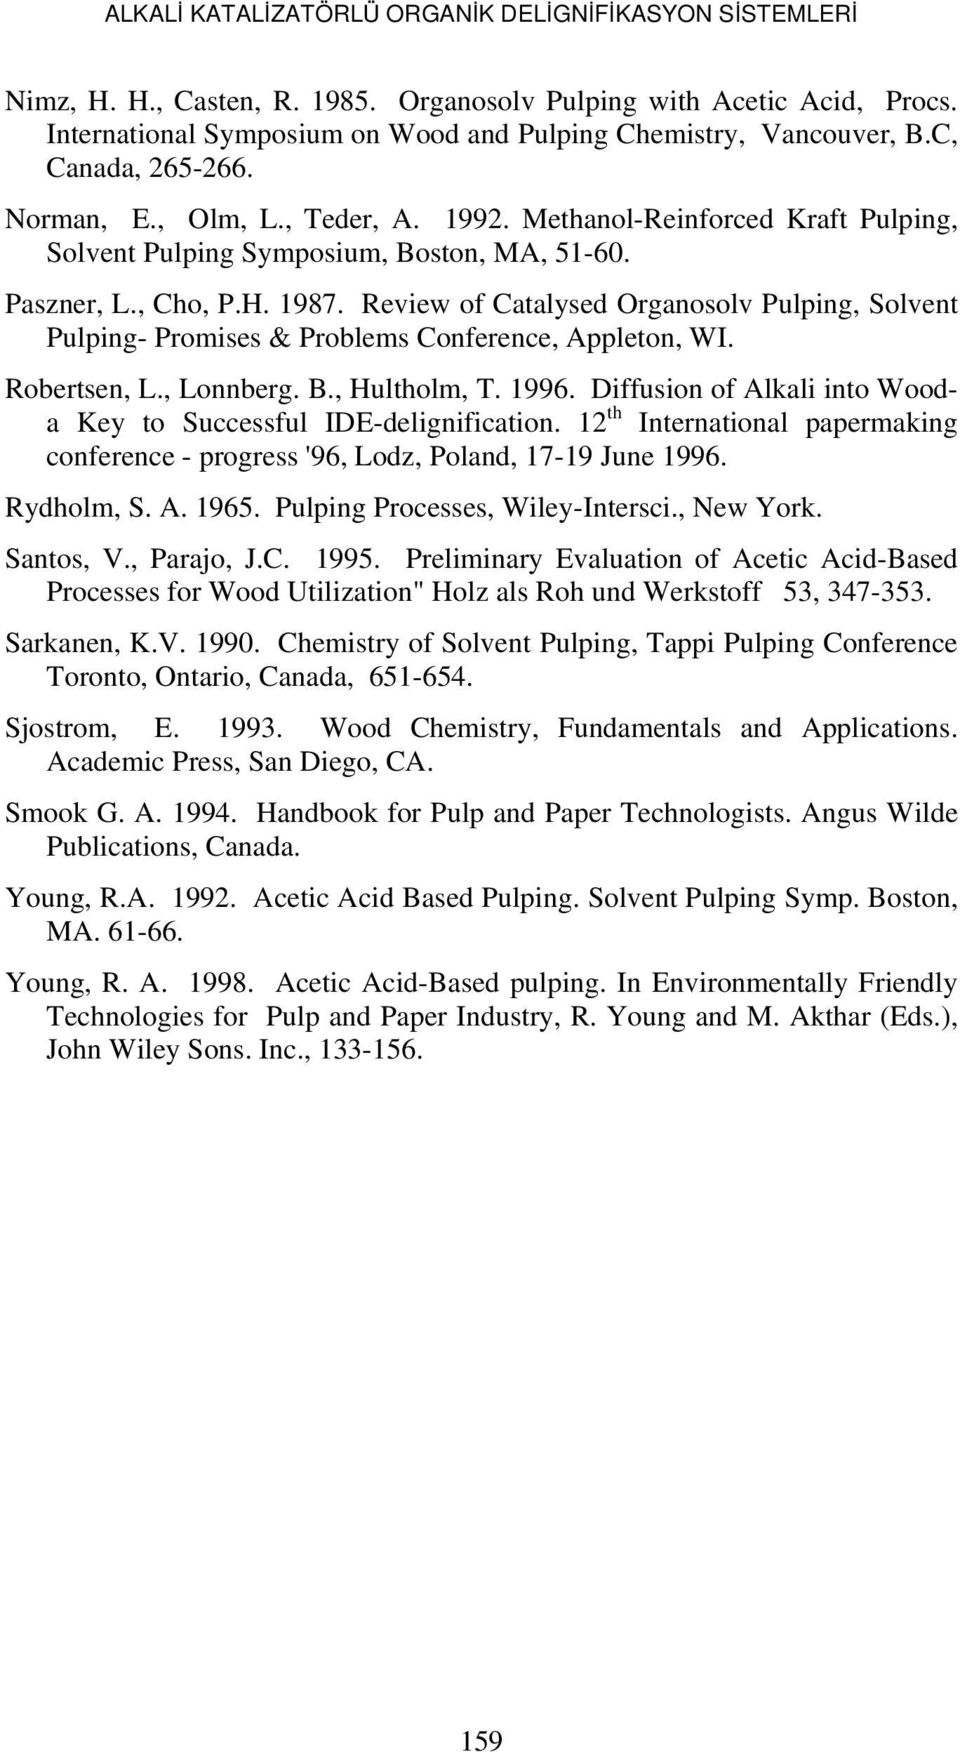 Review of Catalysed Organosolv Pulping, Solvent Pulping- Promises & Problems Conference, Appleton, WI. Robertsen, L., Lonnberg. B., Hultholm, T. 1996.